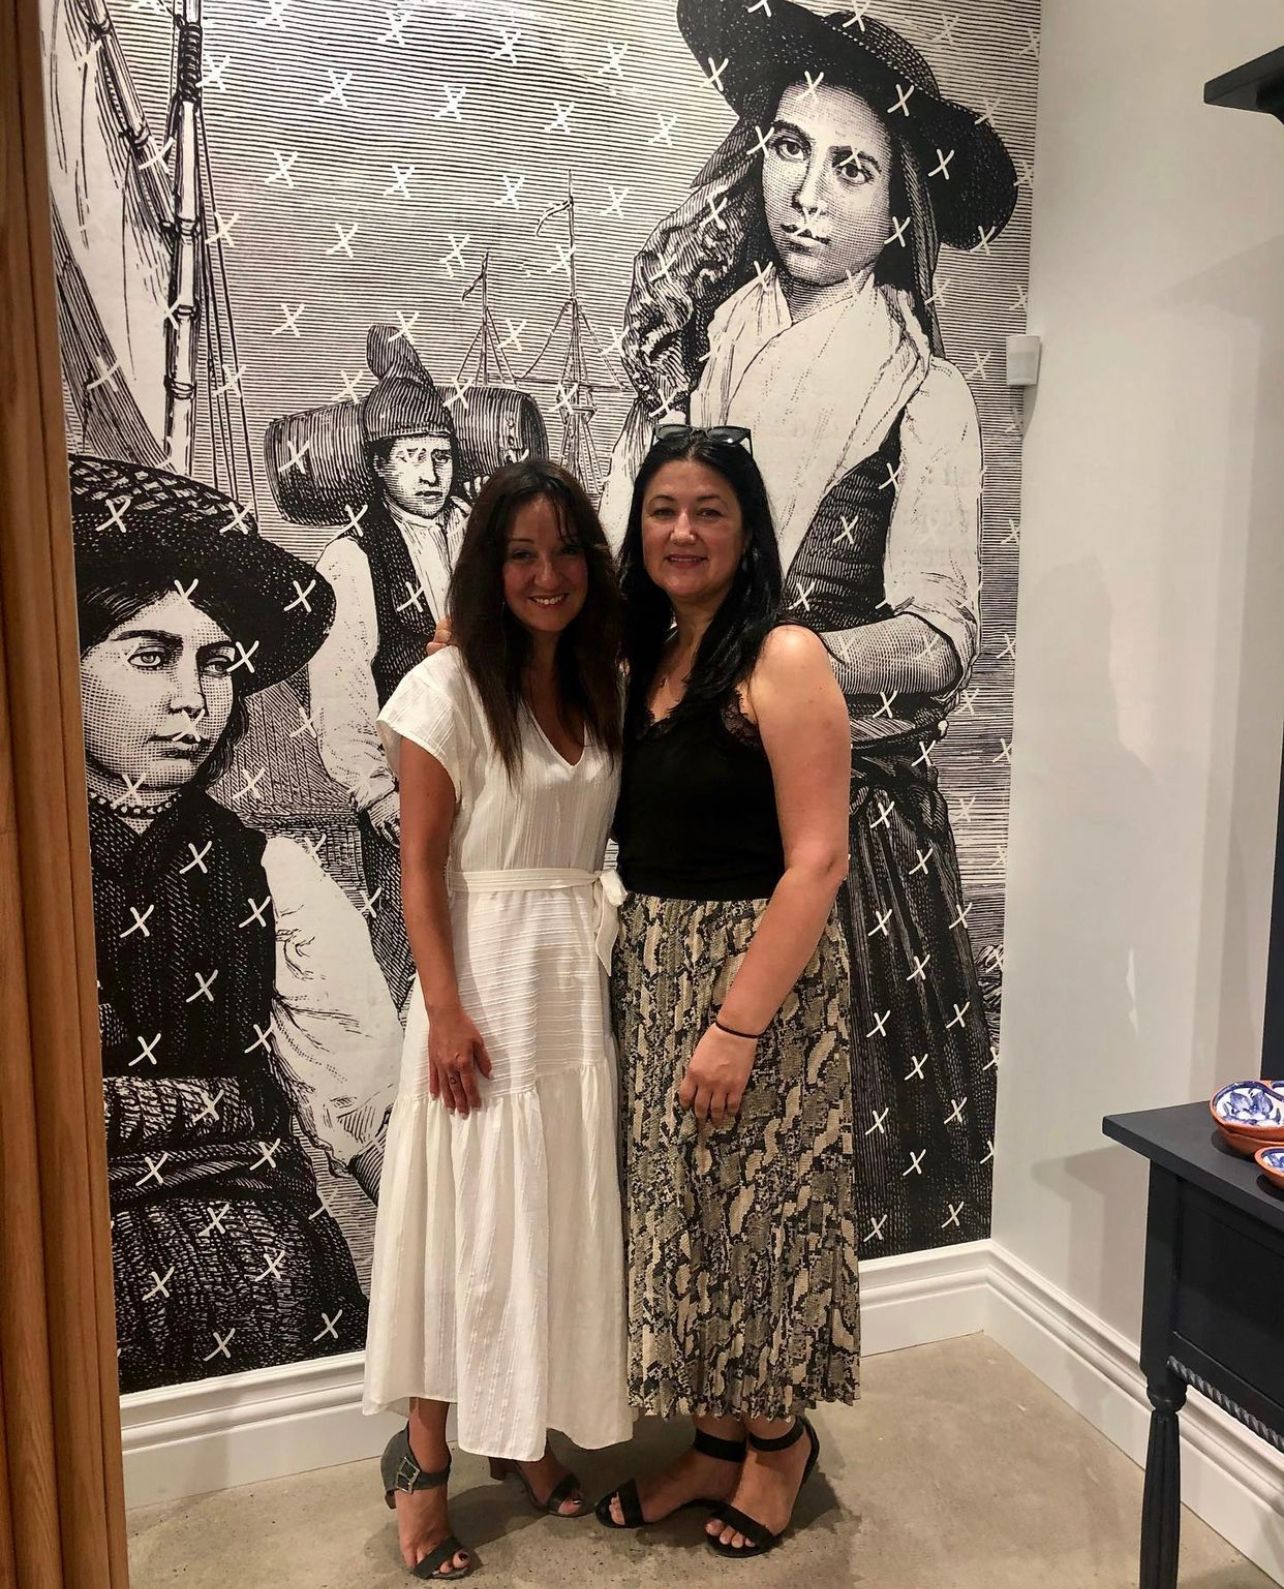 Nancy Fernandes and Fatima Santos, Founders of Saudade Toronto, standing in front of full length mural wallpaper of female artisans. Nancy is the inspiration for the greeting card Saudade, part of the bel loved collection by beknown.